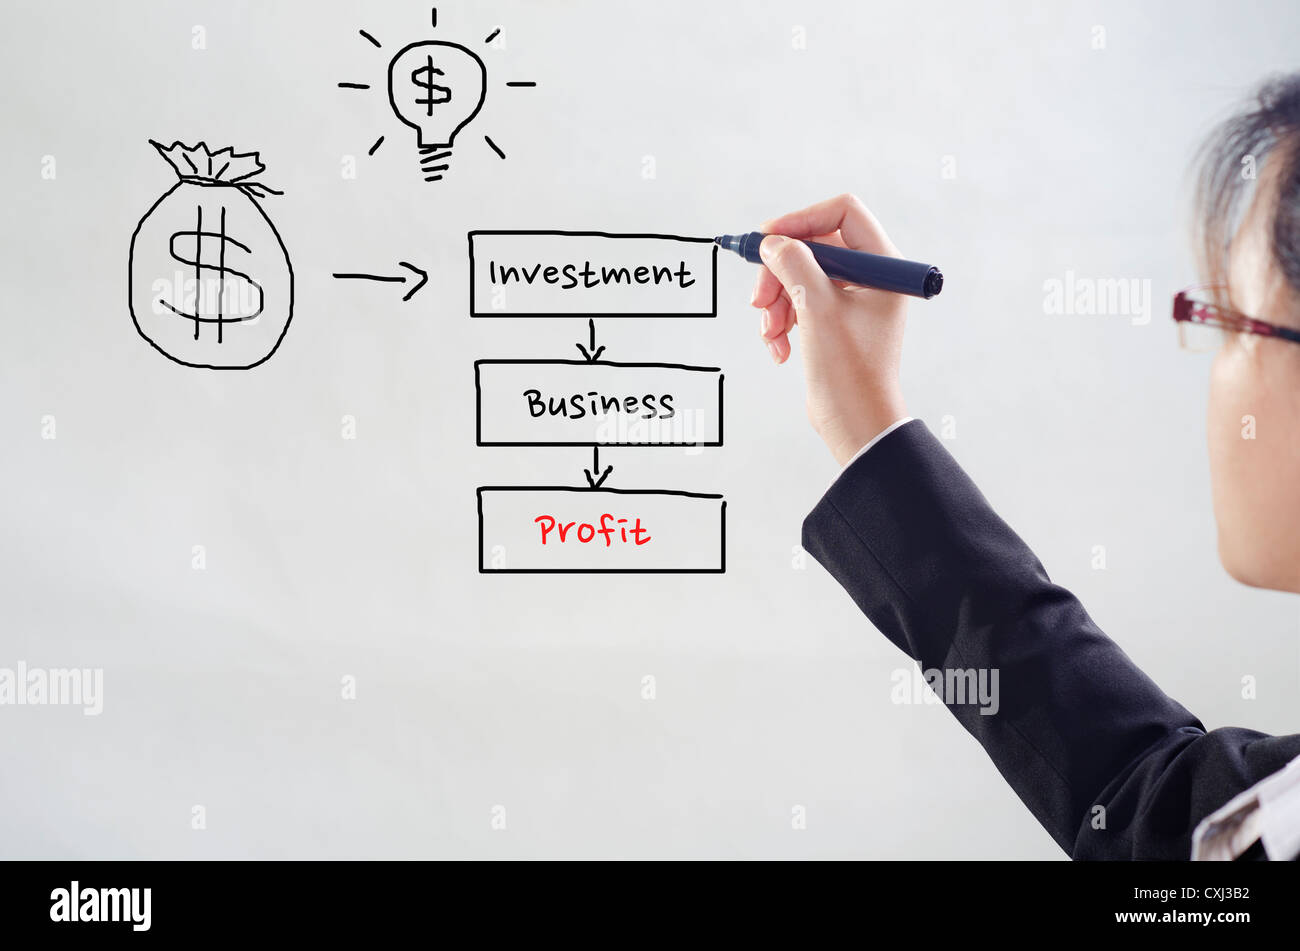 drawing diagram for investment Stock Photo